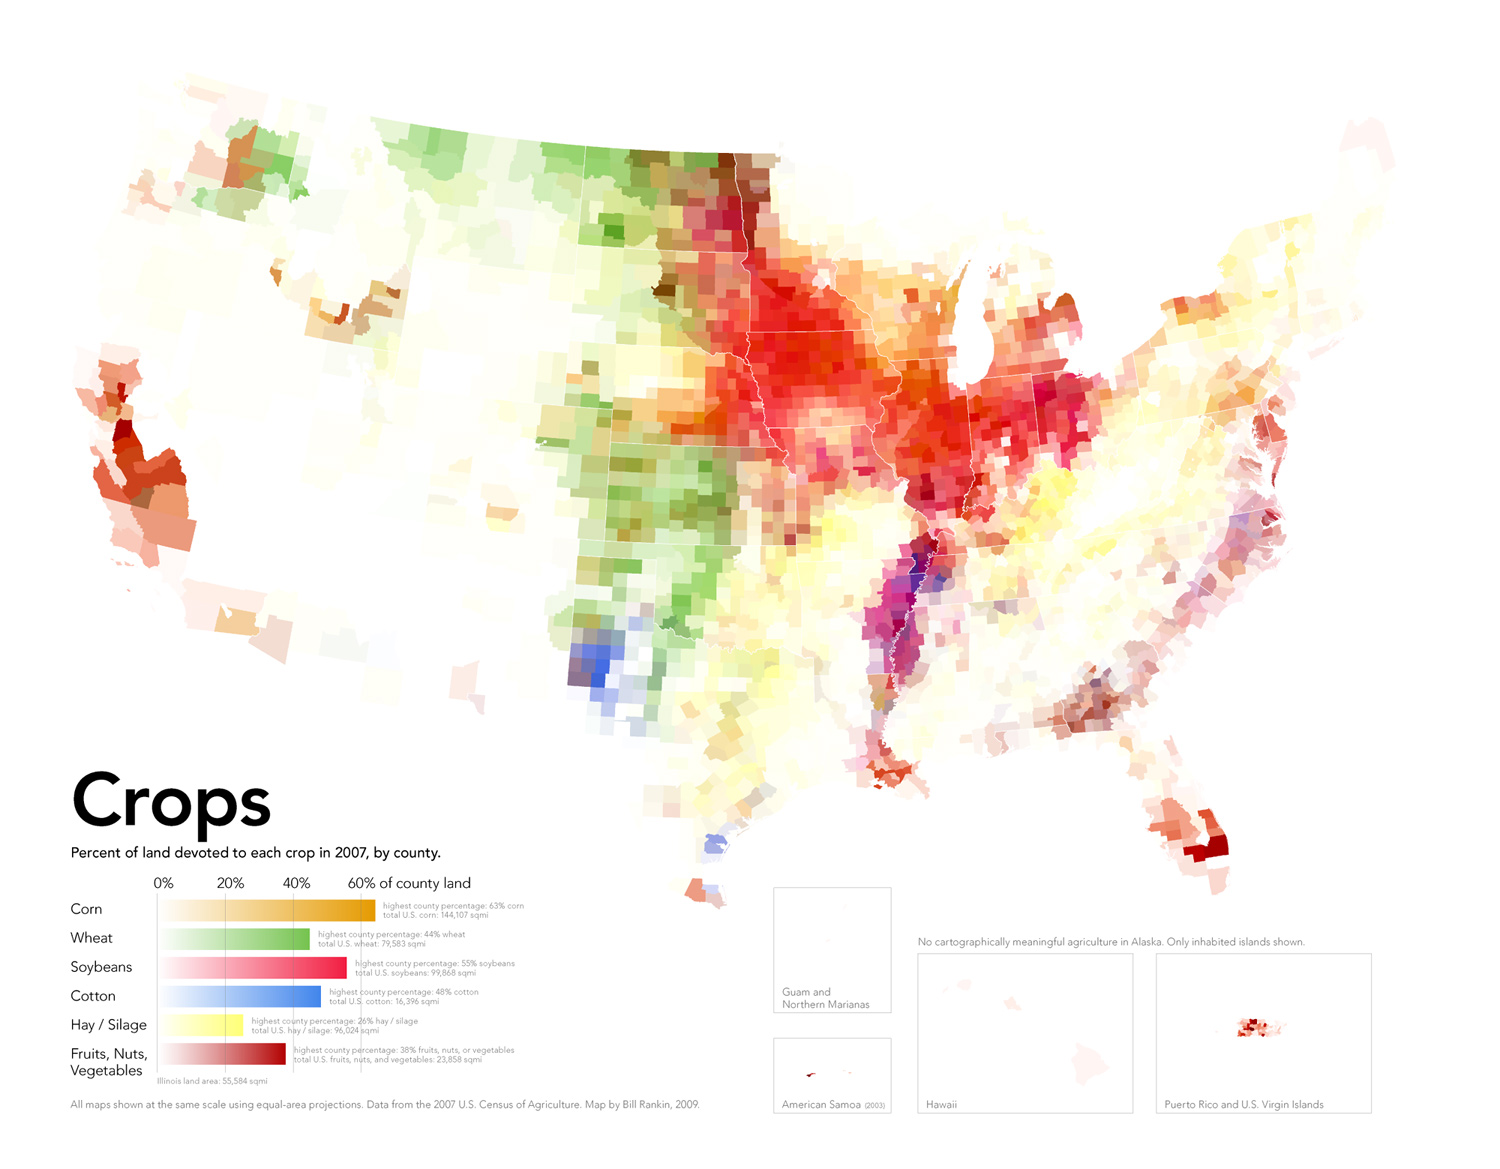 This is a map that shows the percent of land devoted to each agricultural crop in the United States. The data comes from the 2007 U.S. Census of Agriculture.